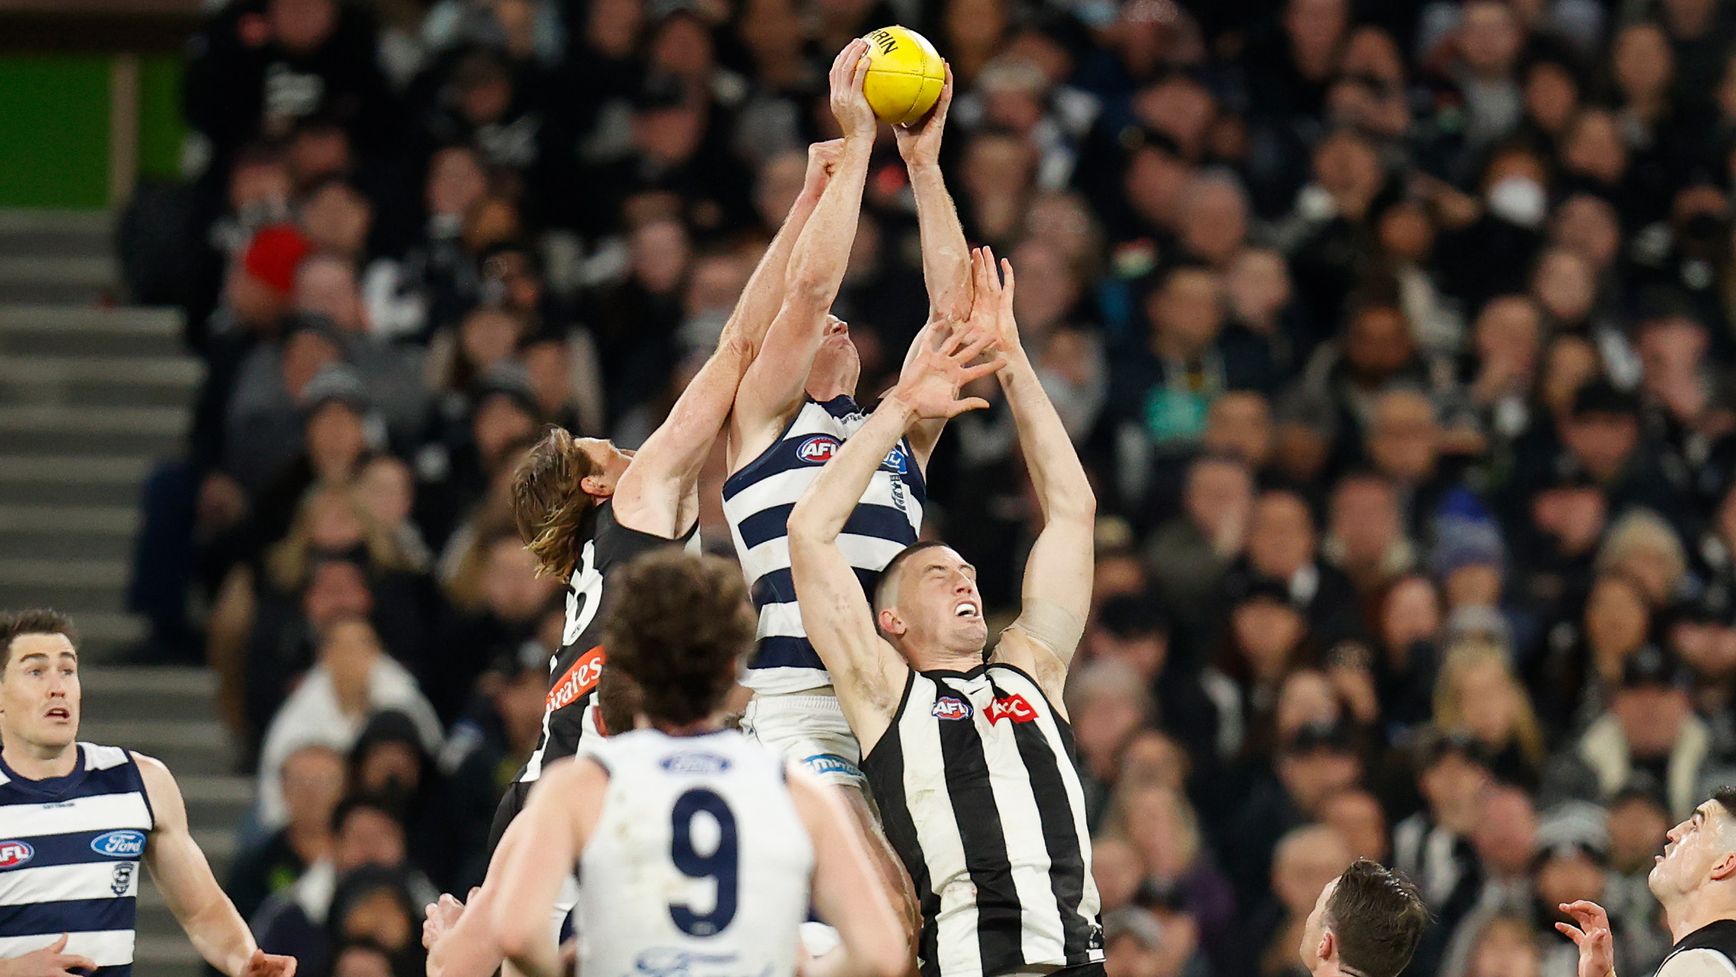 Geelong&#x27;s Gary Rohan marks the ball over Darcy Cameron of the Magpies.